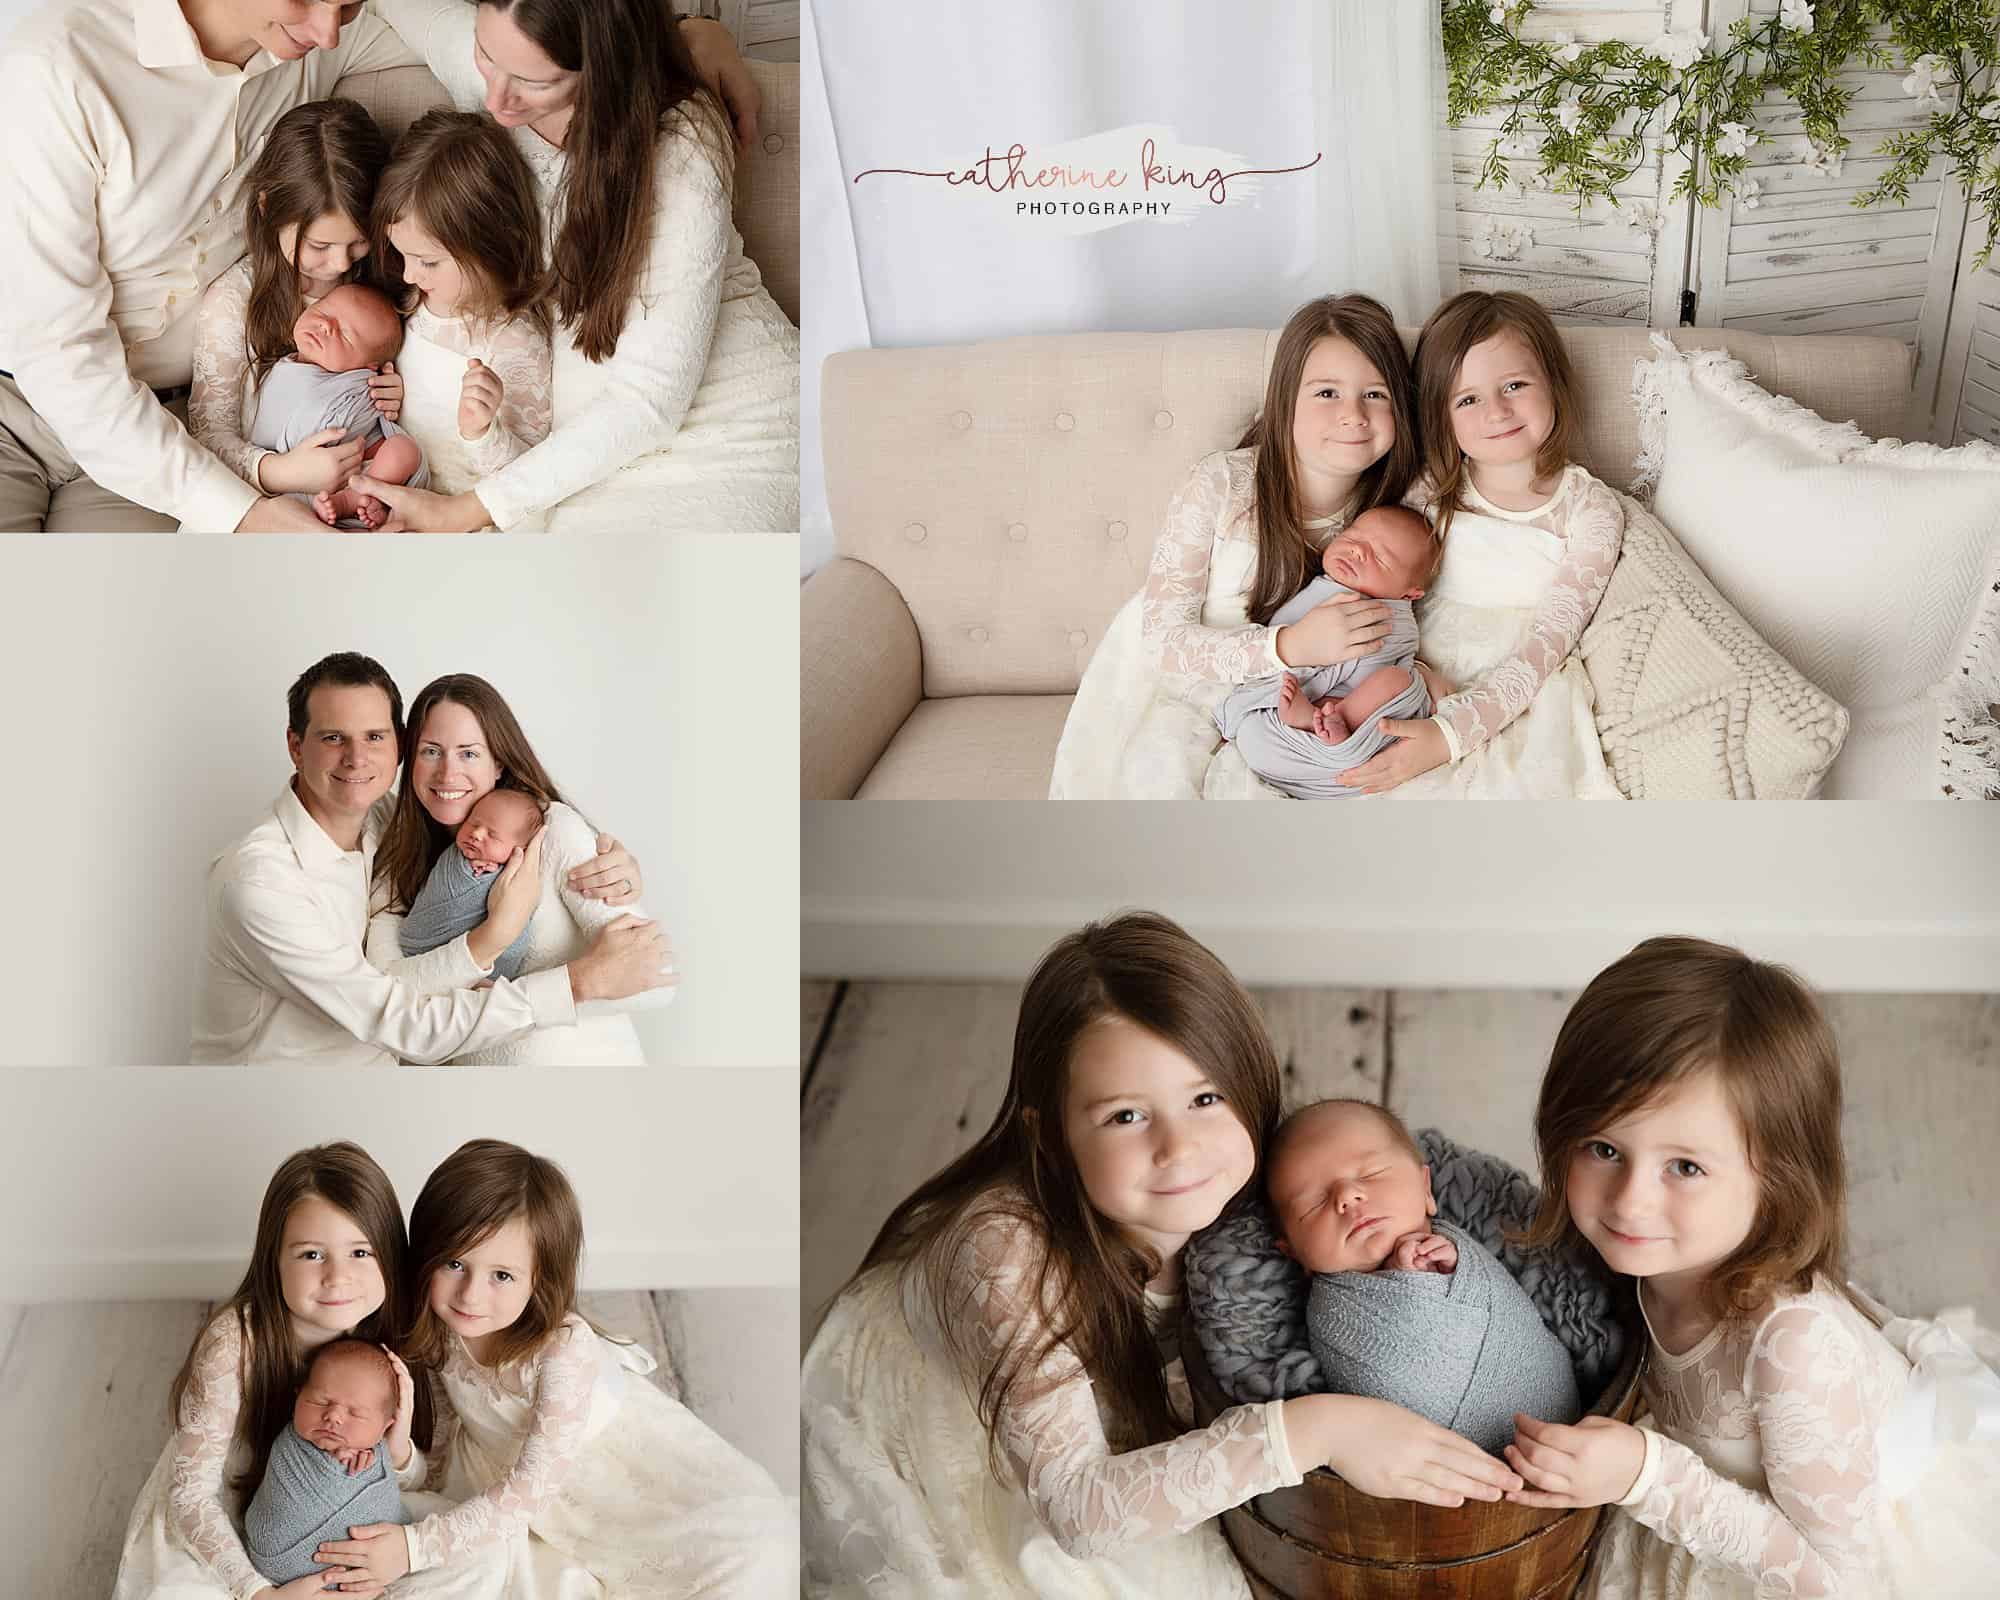 incorporating siblings and families in newborn photography sessions